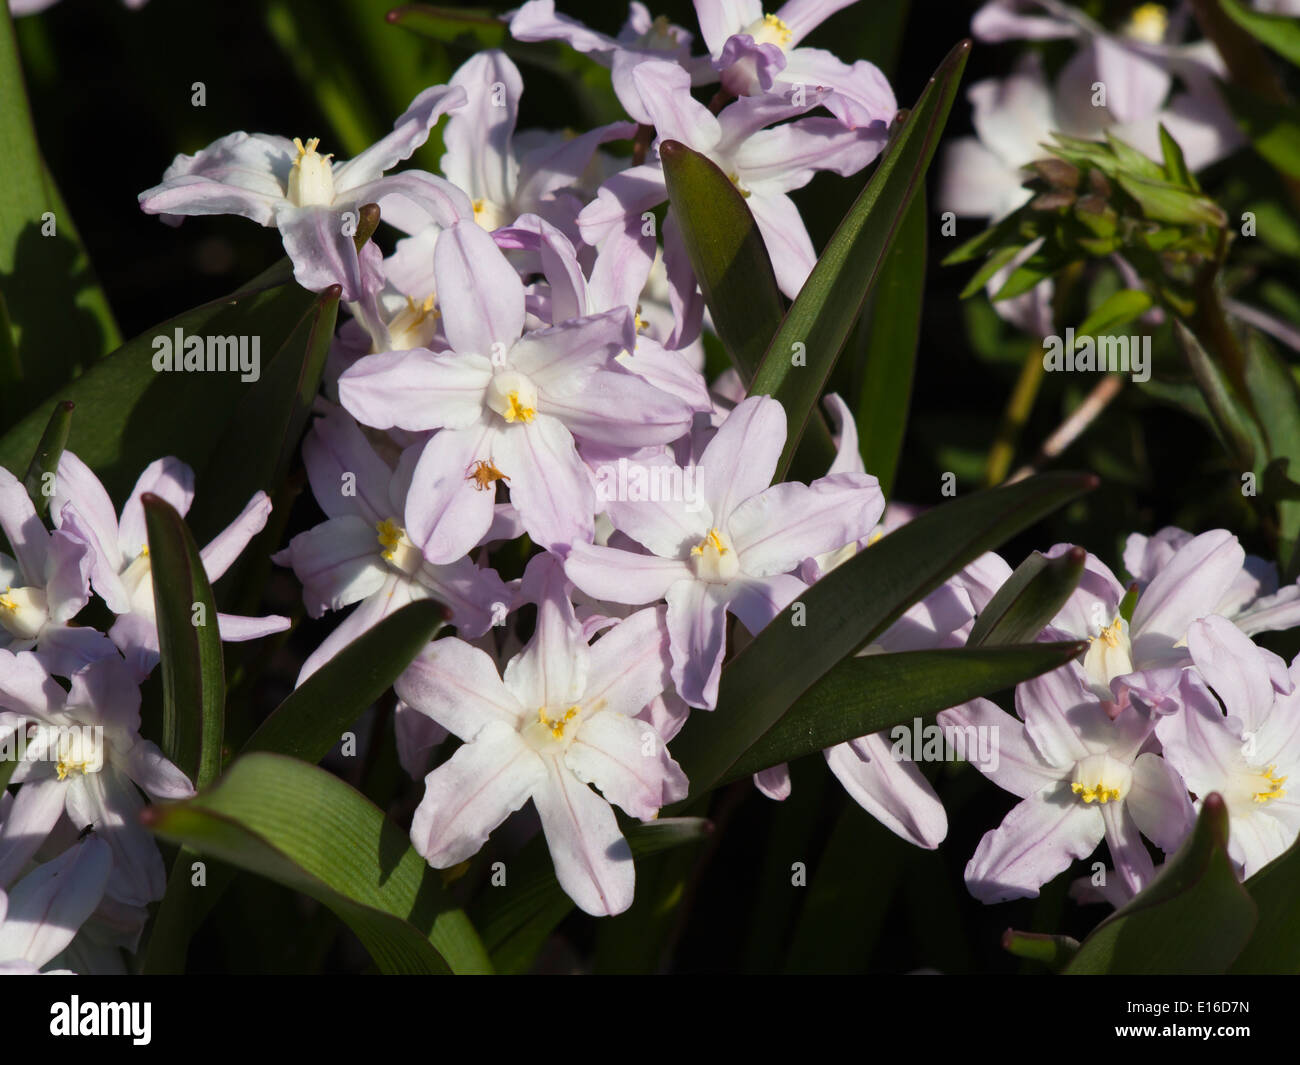 Scilla forbesii, Pink Giant, close up from the botanical garden in Oslo Norway Stock Photo